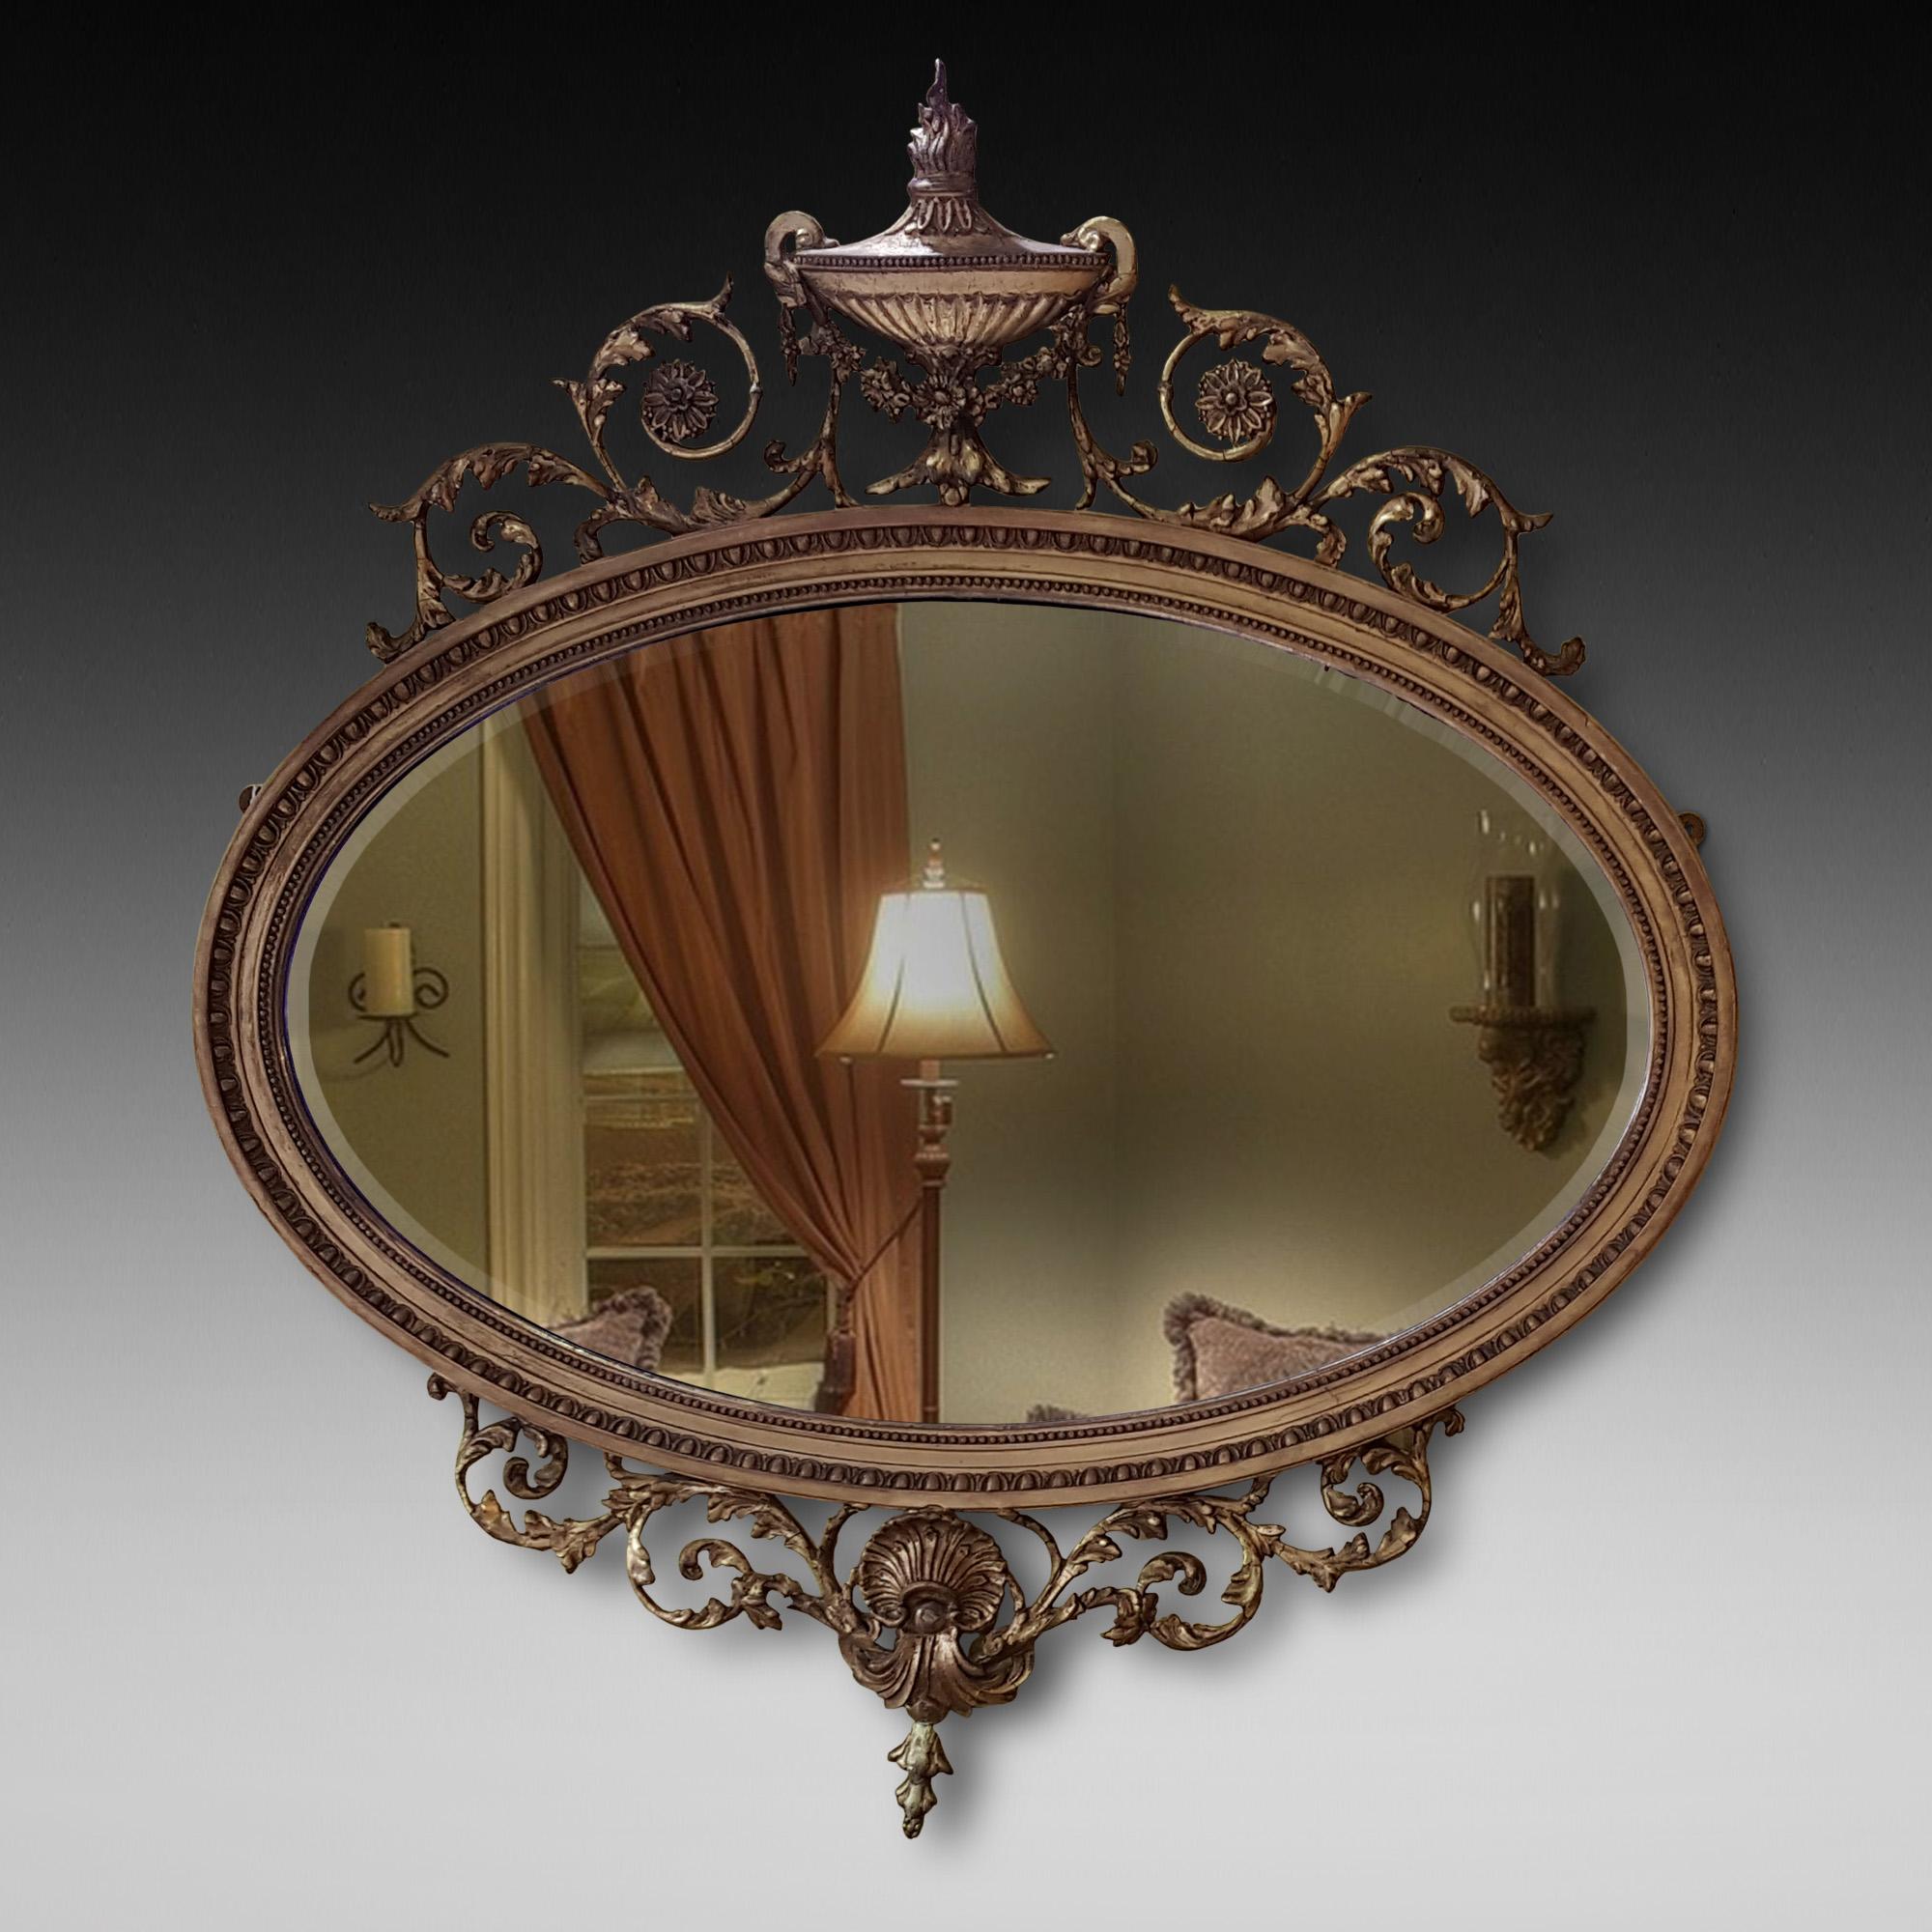 Late 19th century Adam Revival giltwood and gesso mirror decorated with urn capital, foliage, rosettes and shell.
Measures: 36